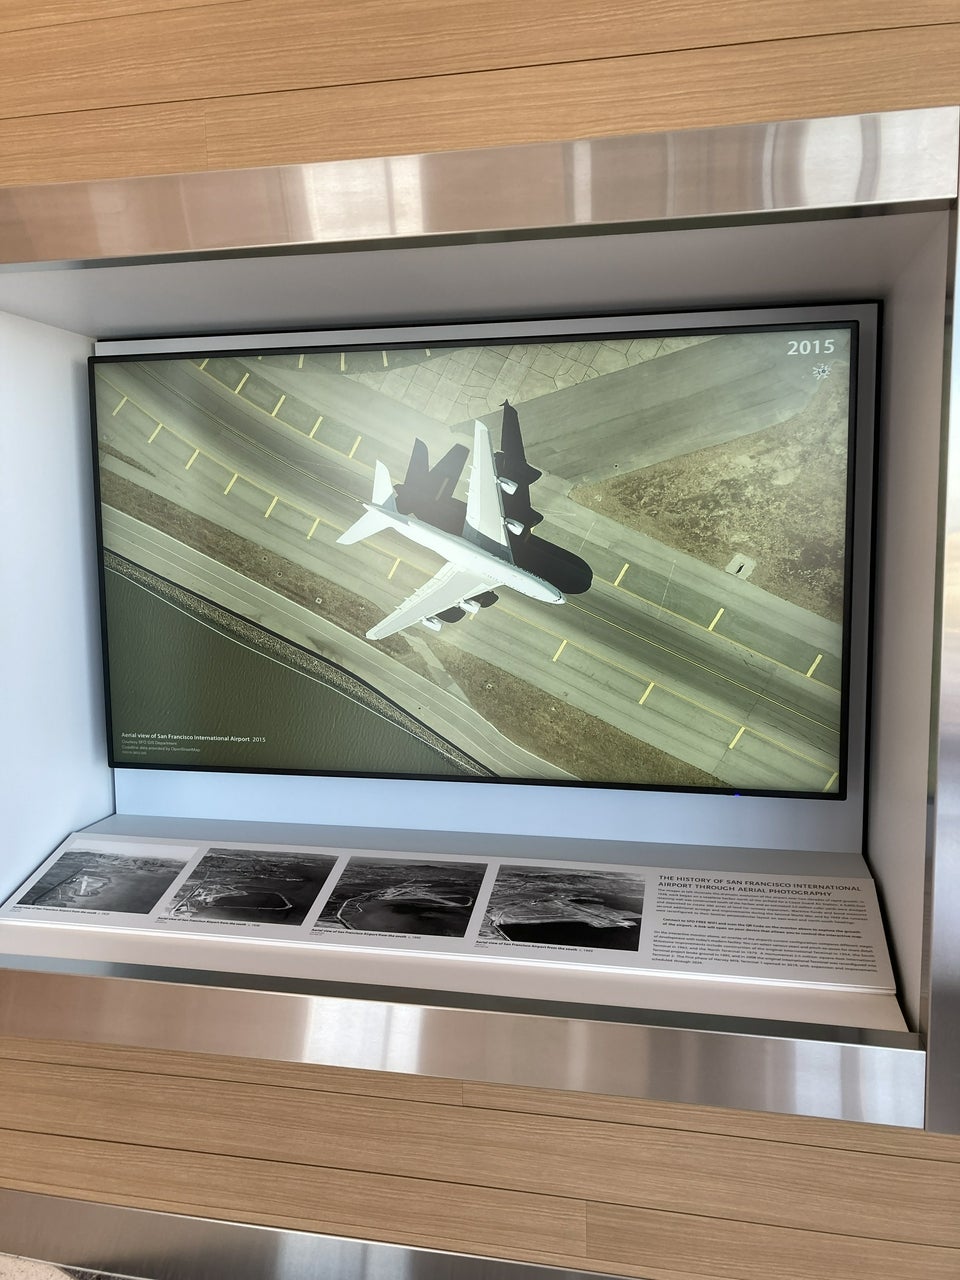 View of interactive monitor in SkyTerrace exhibition